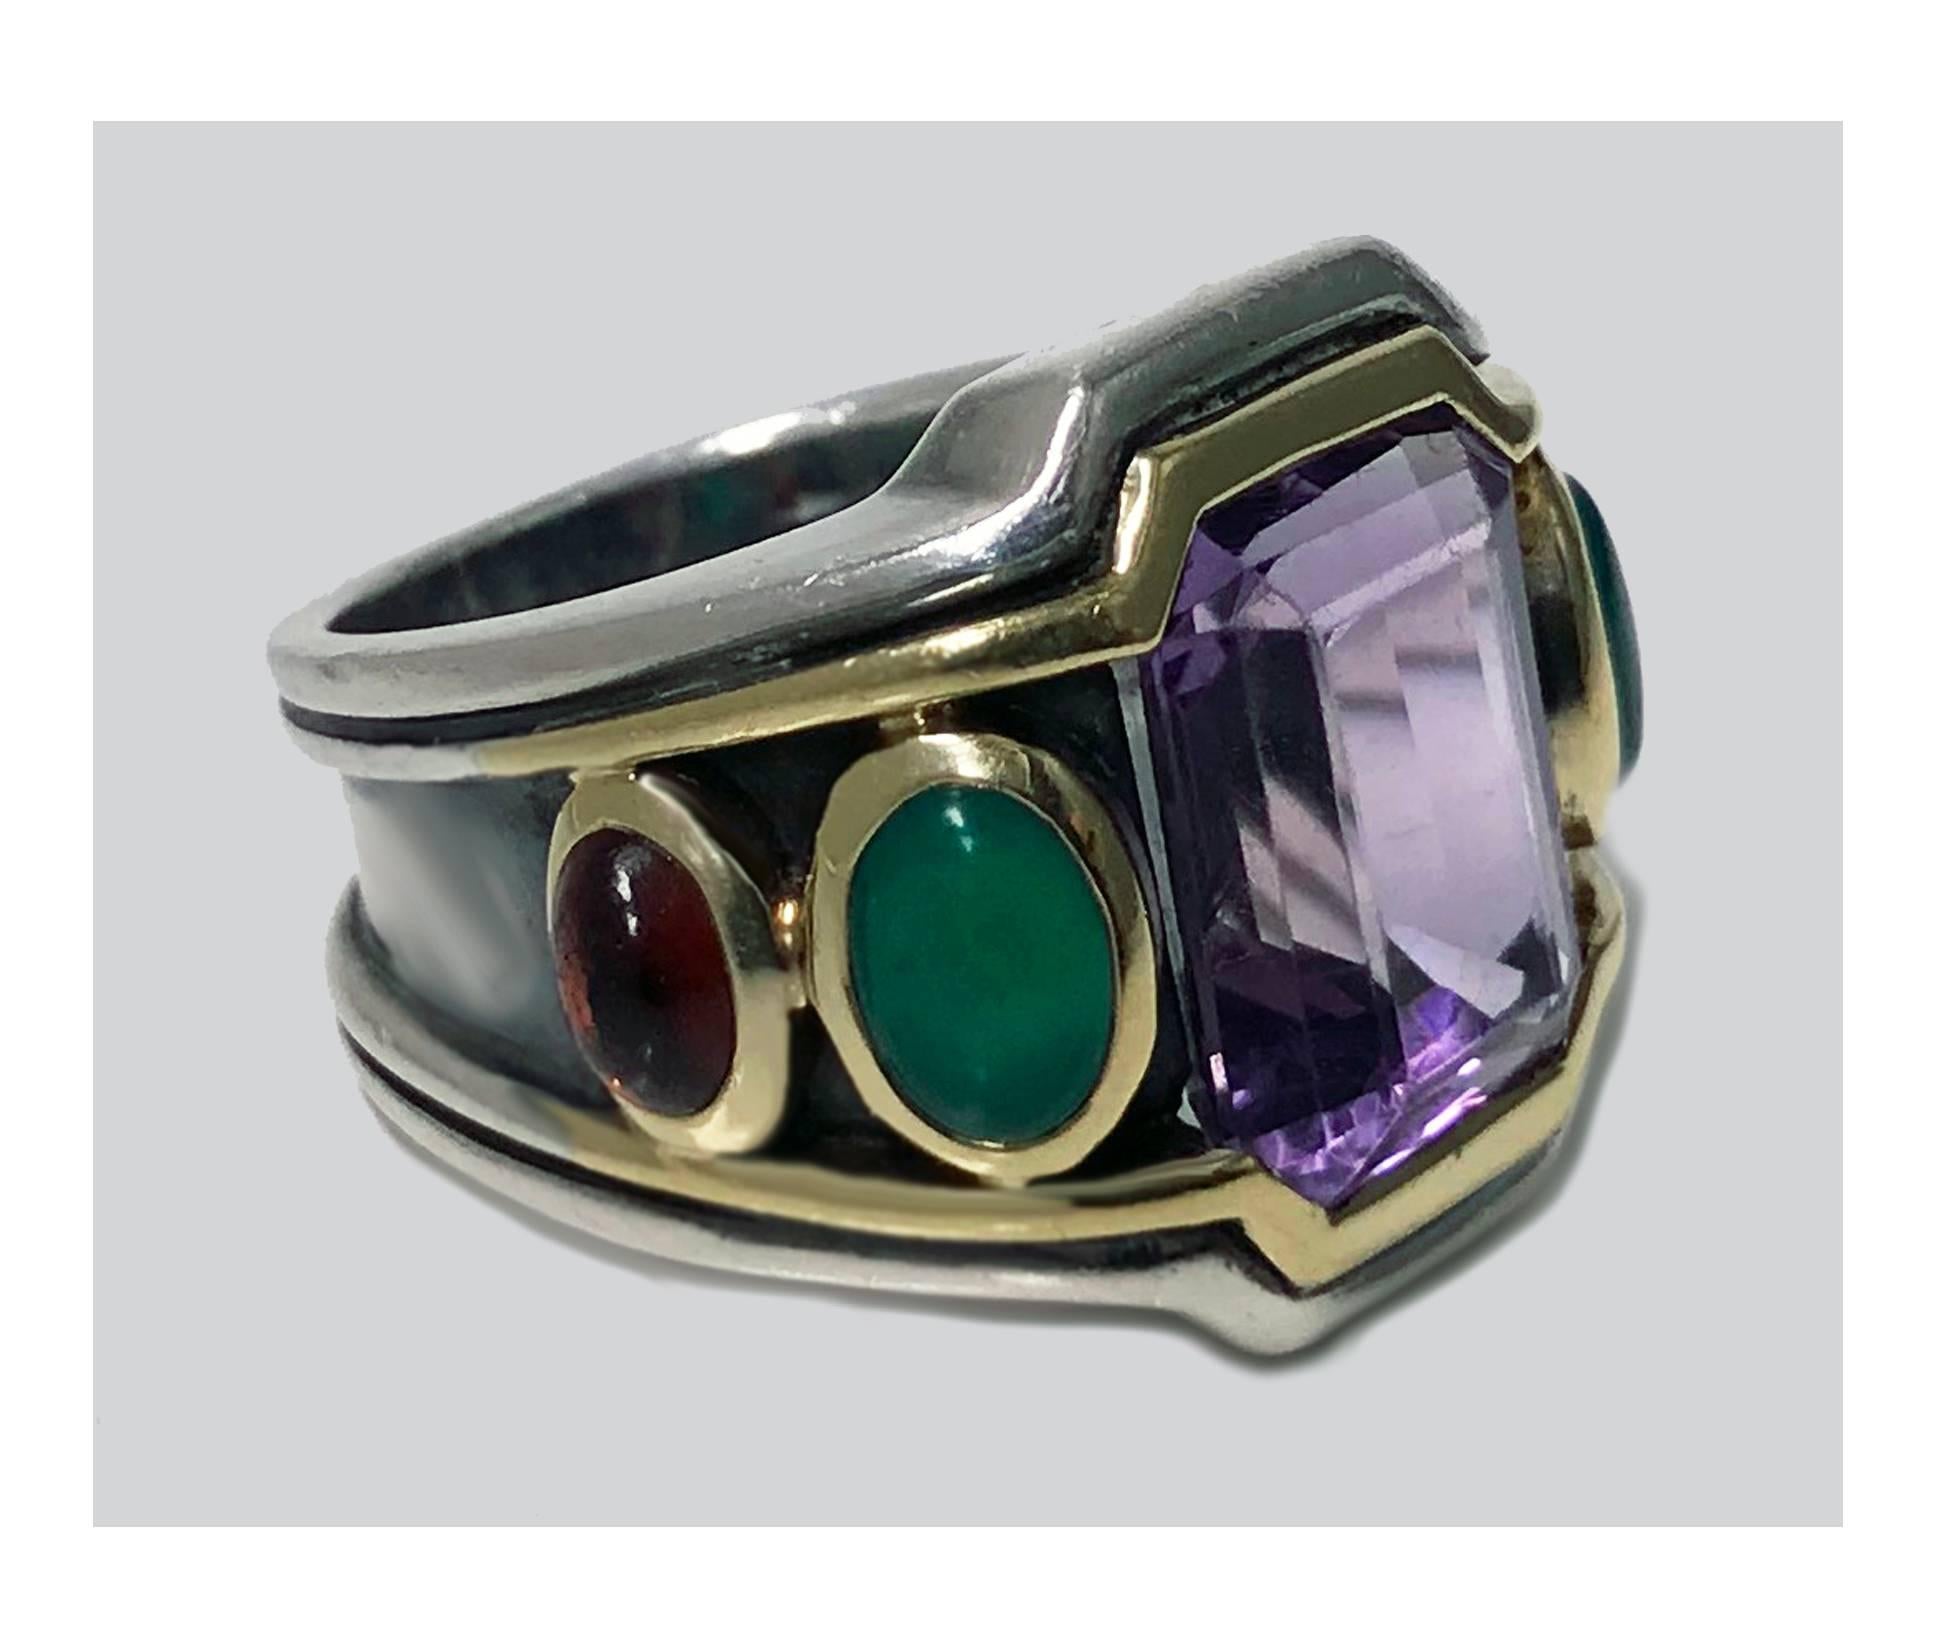 Bold Seiden Gang 18K Sterling Gem set Ring, 20th century. The Ring of classic architectural design set with a step cut amethyst, gauging approximately 13 x 11 x 7 mm, flanked on either side with gold bezel set cabochon Chrysoprase and garnet